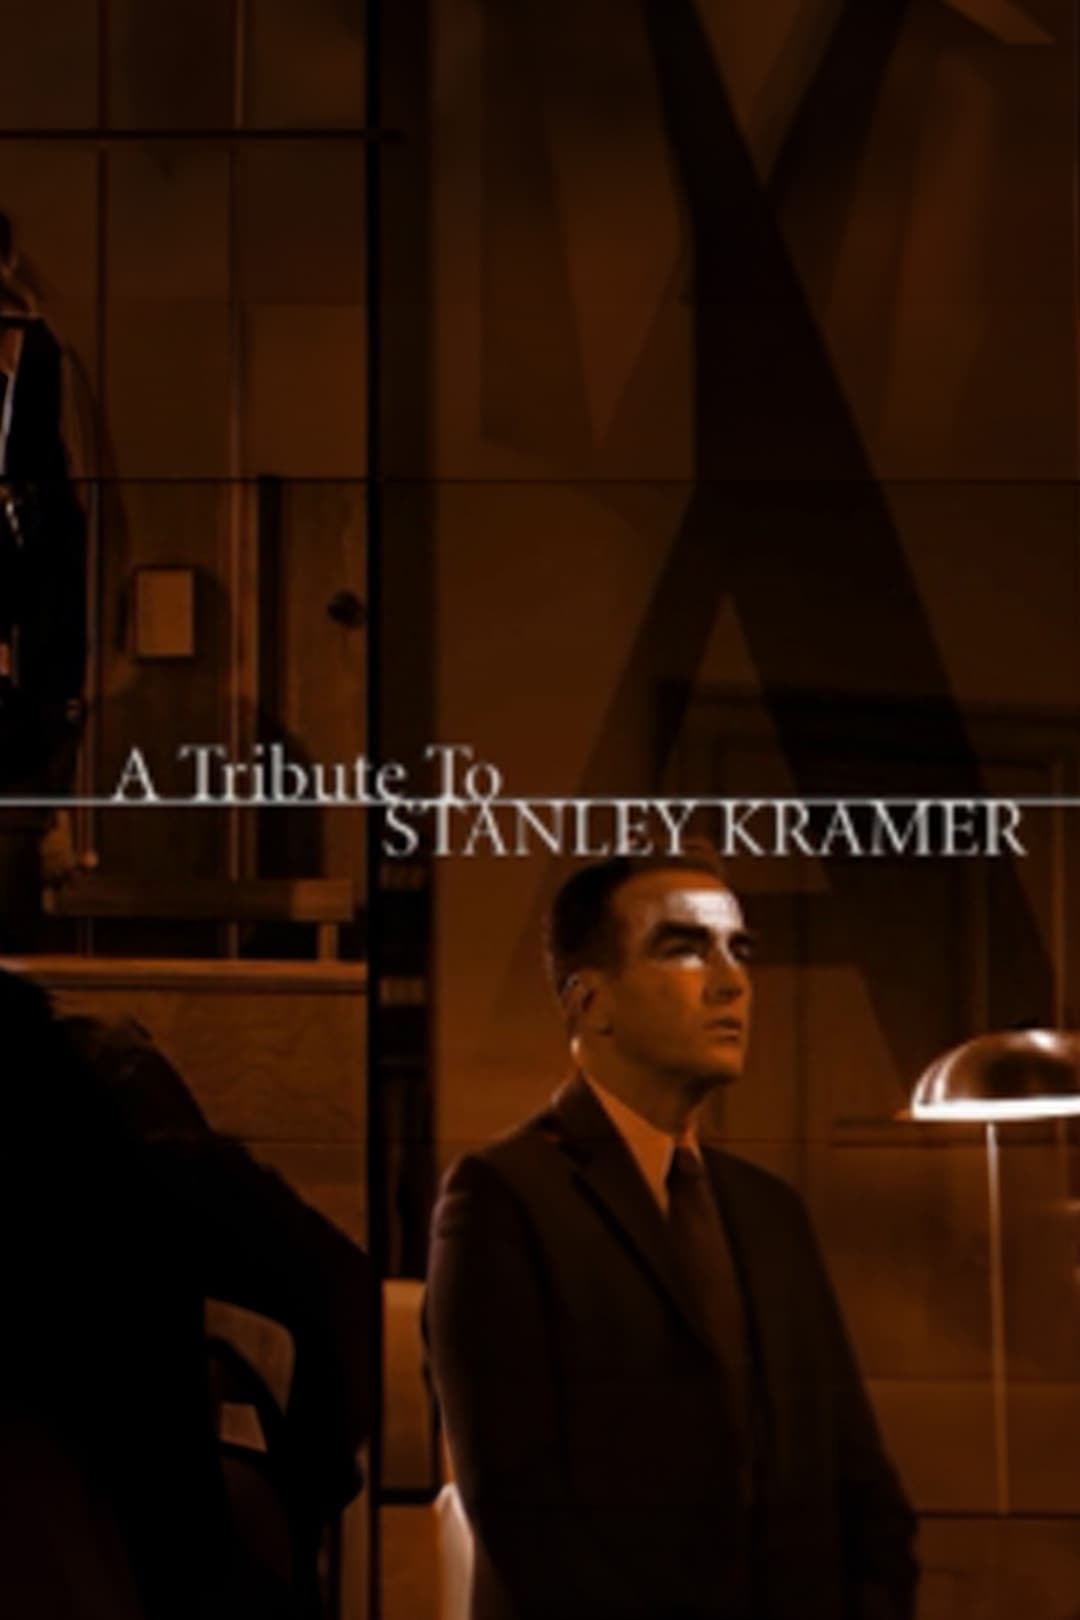 A Tribute to Stanley Kramer